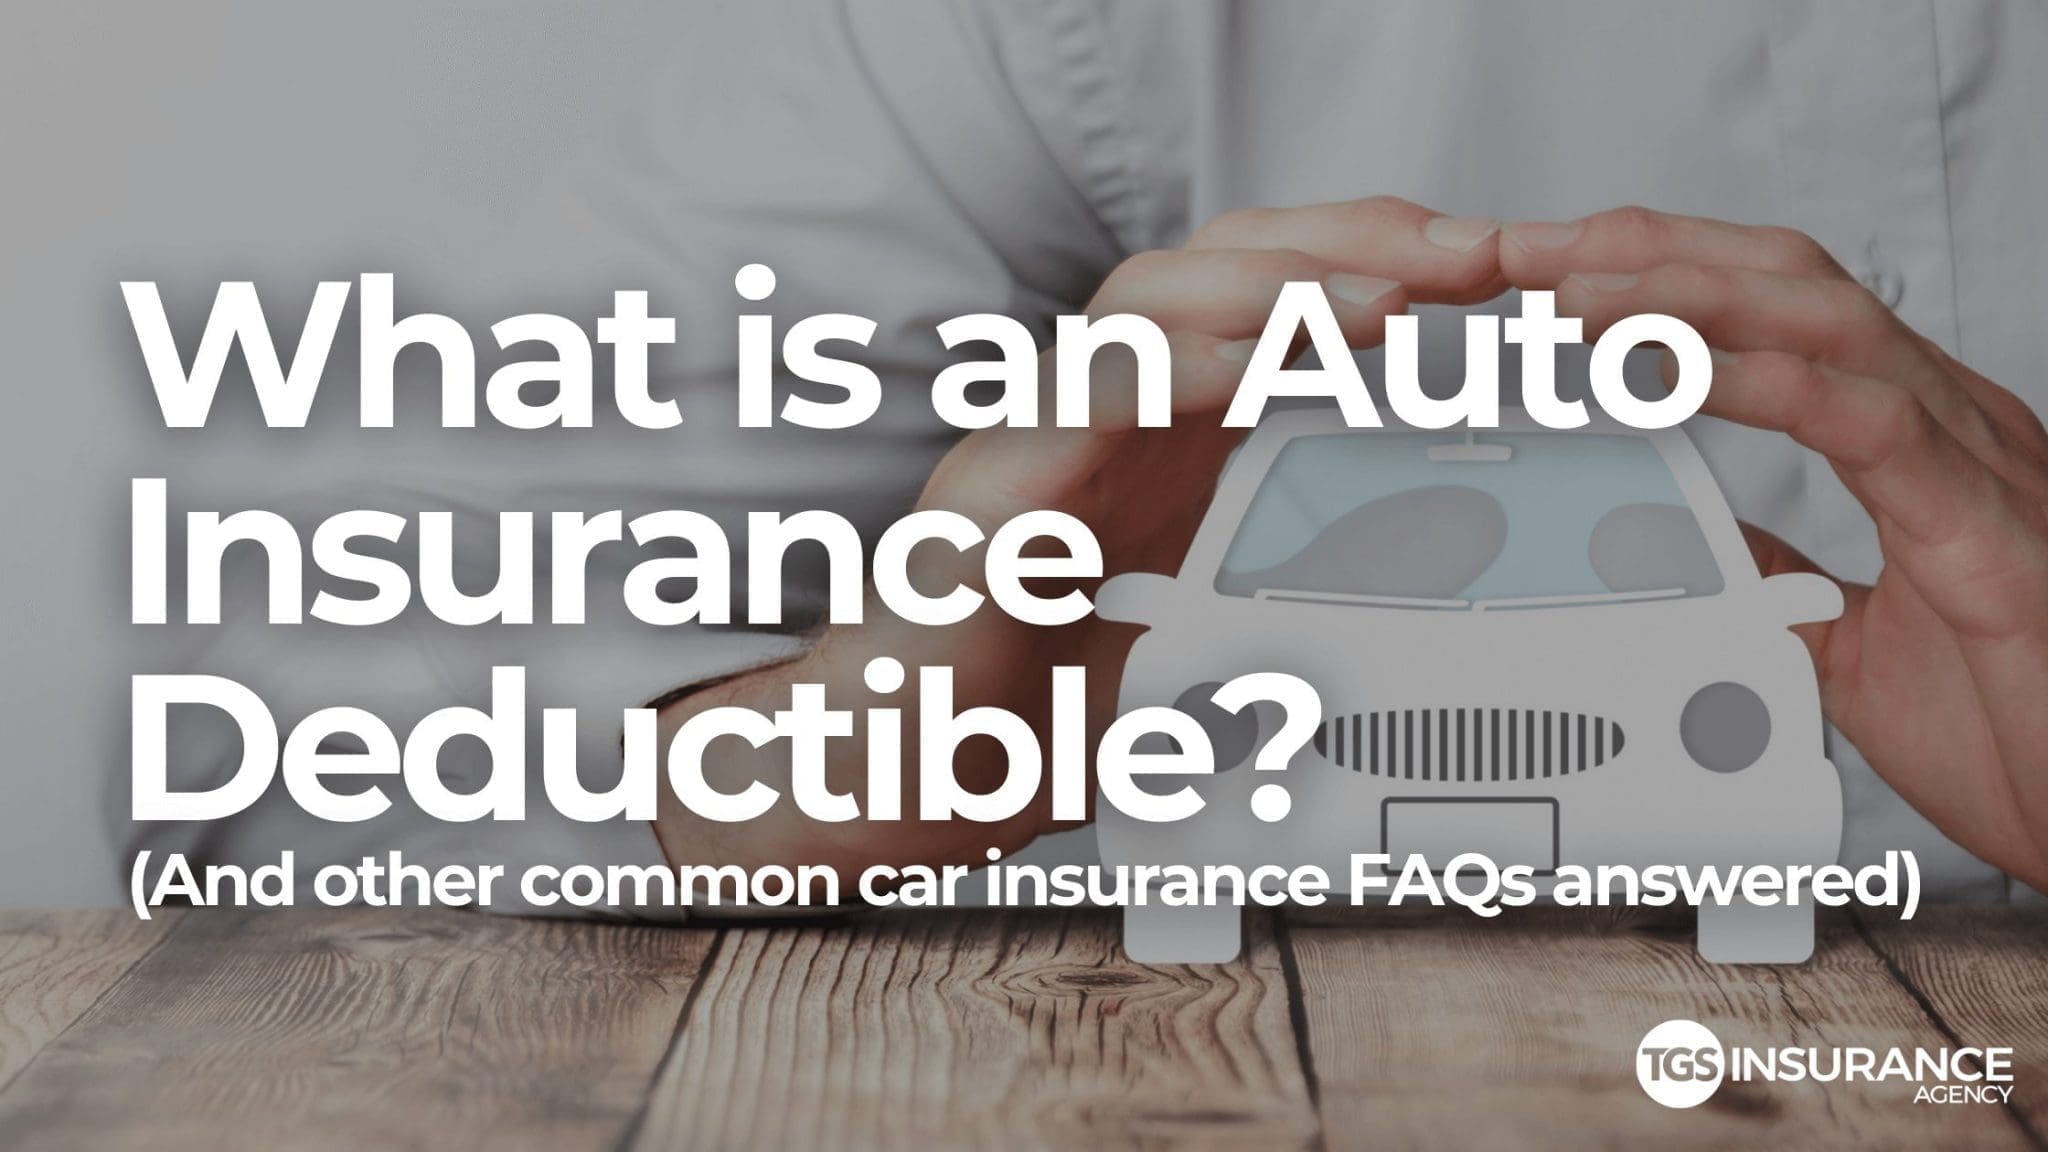 What Is an Auto Insurance Deductible? | TGS Insurance Agency